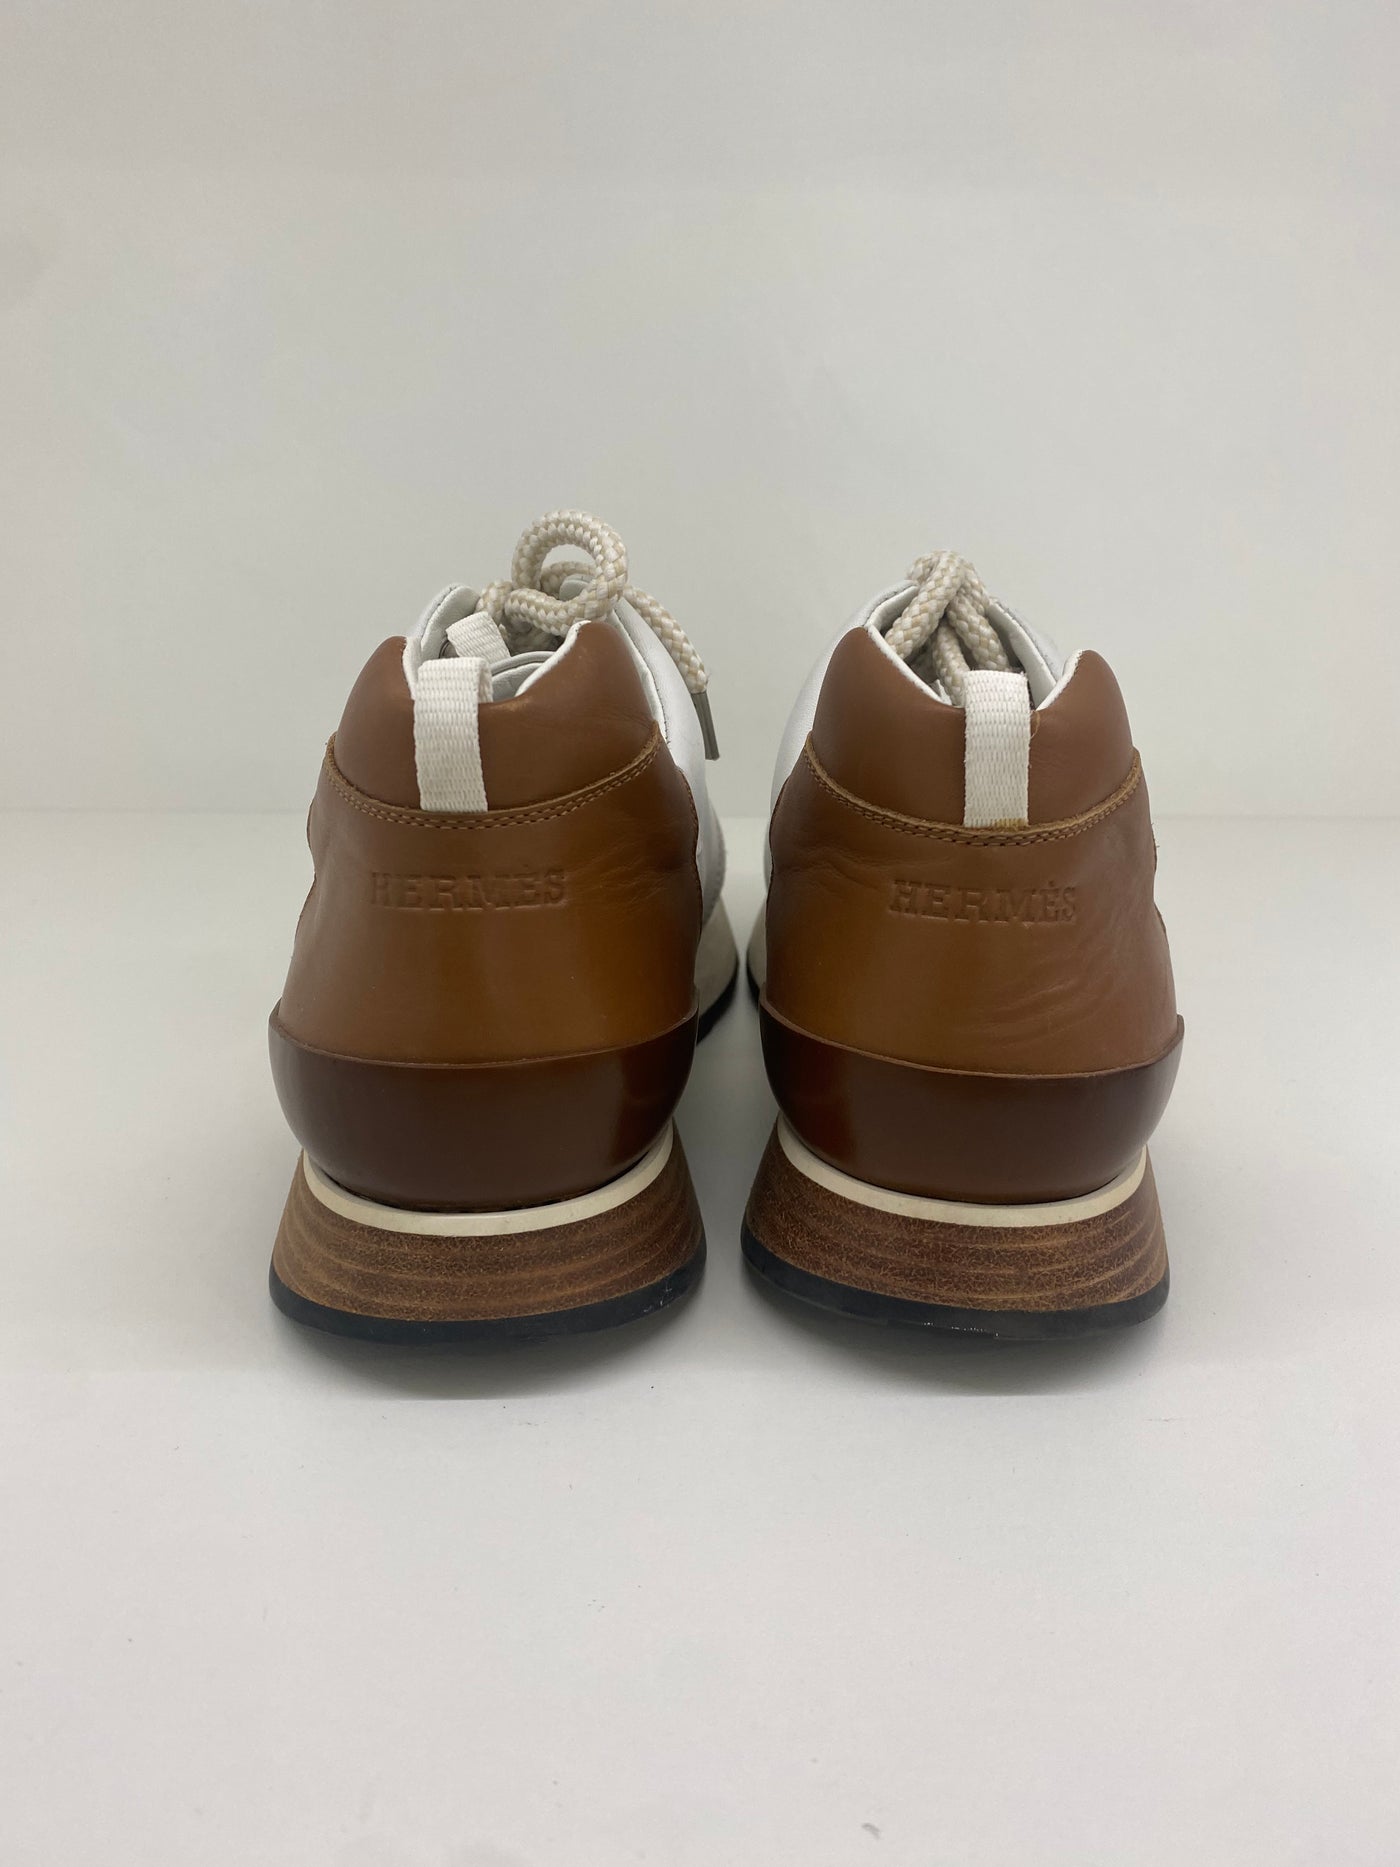 Hermes Brown and White Sneakers - Size 40.5